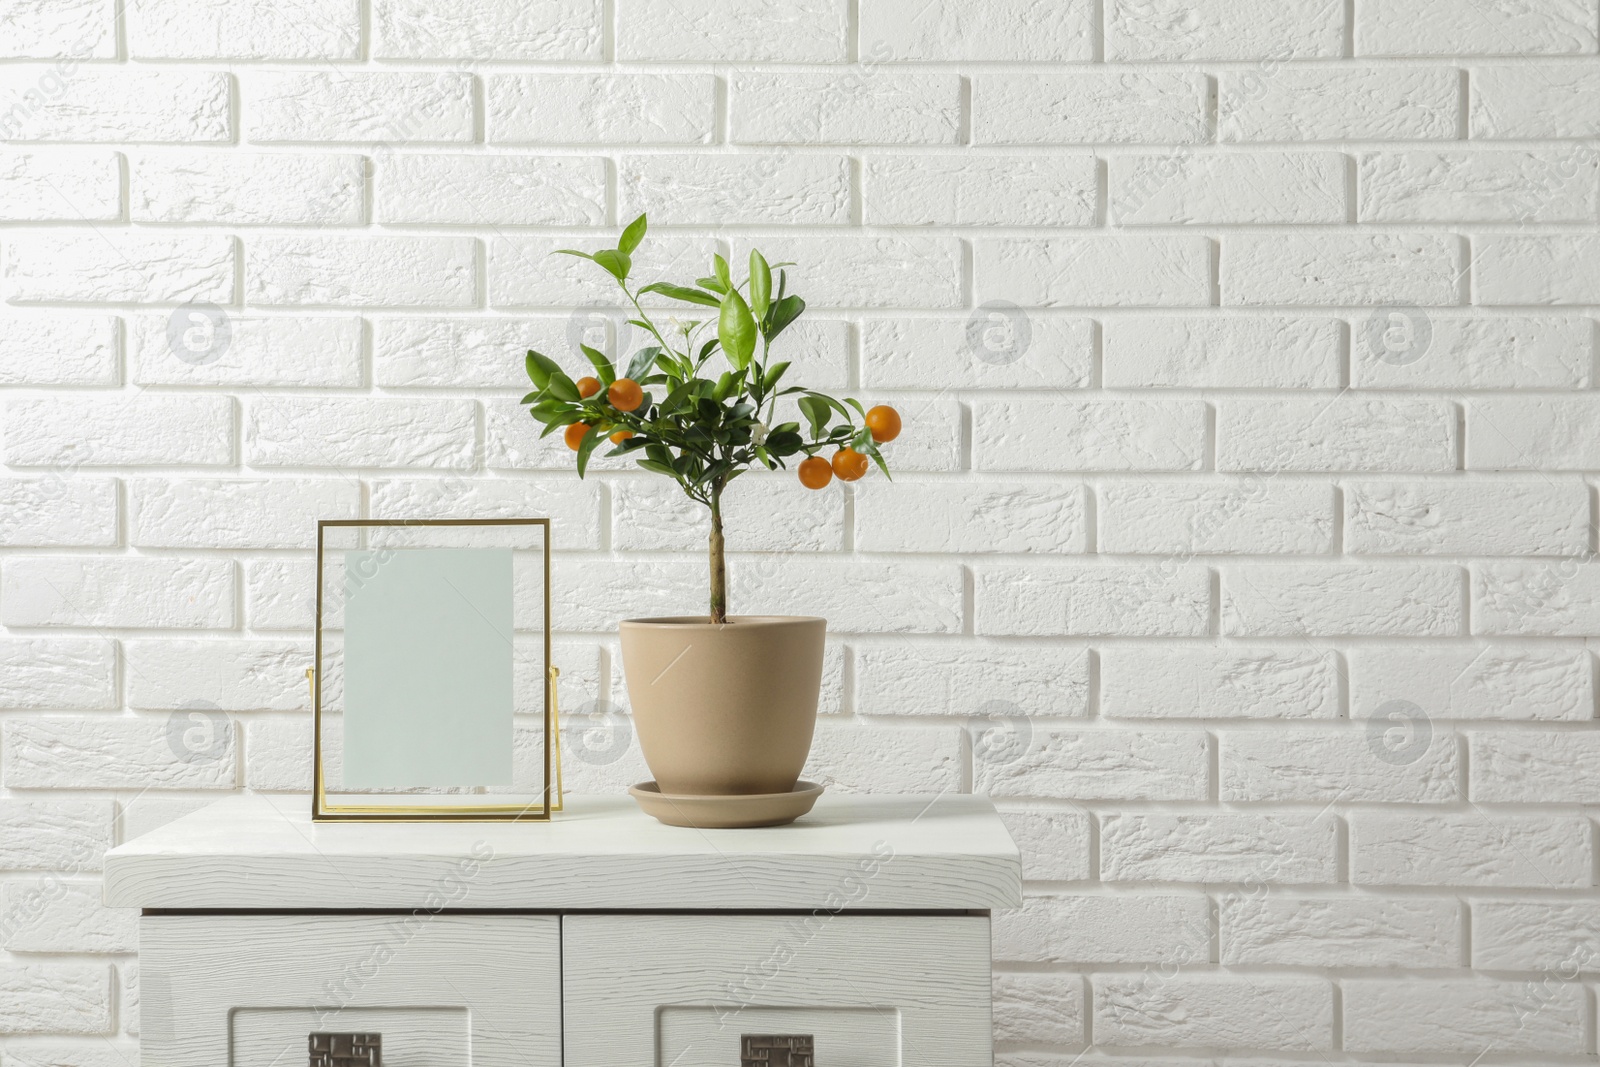 Photo of Potted citrus tree and empty frame on cabinet against brick wall. Space for text